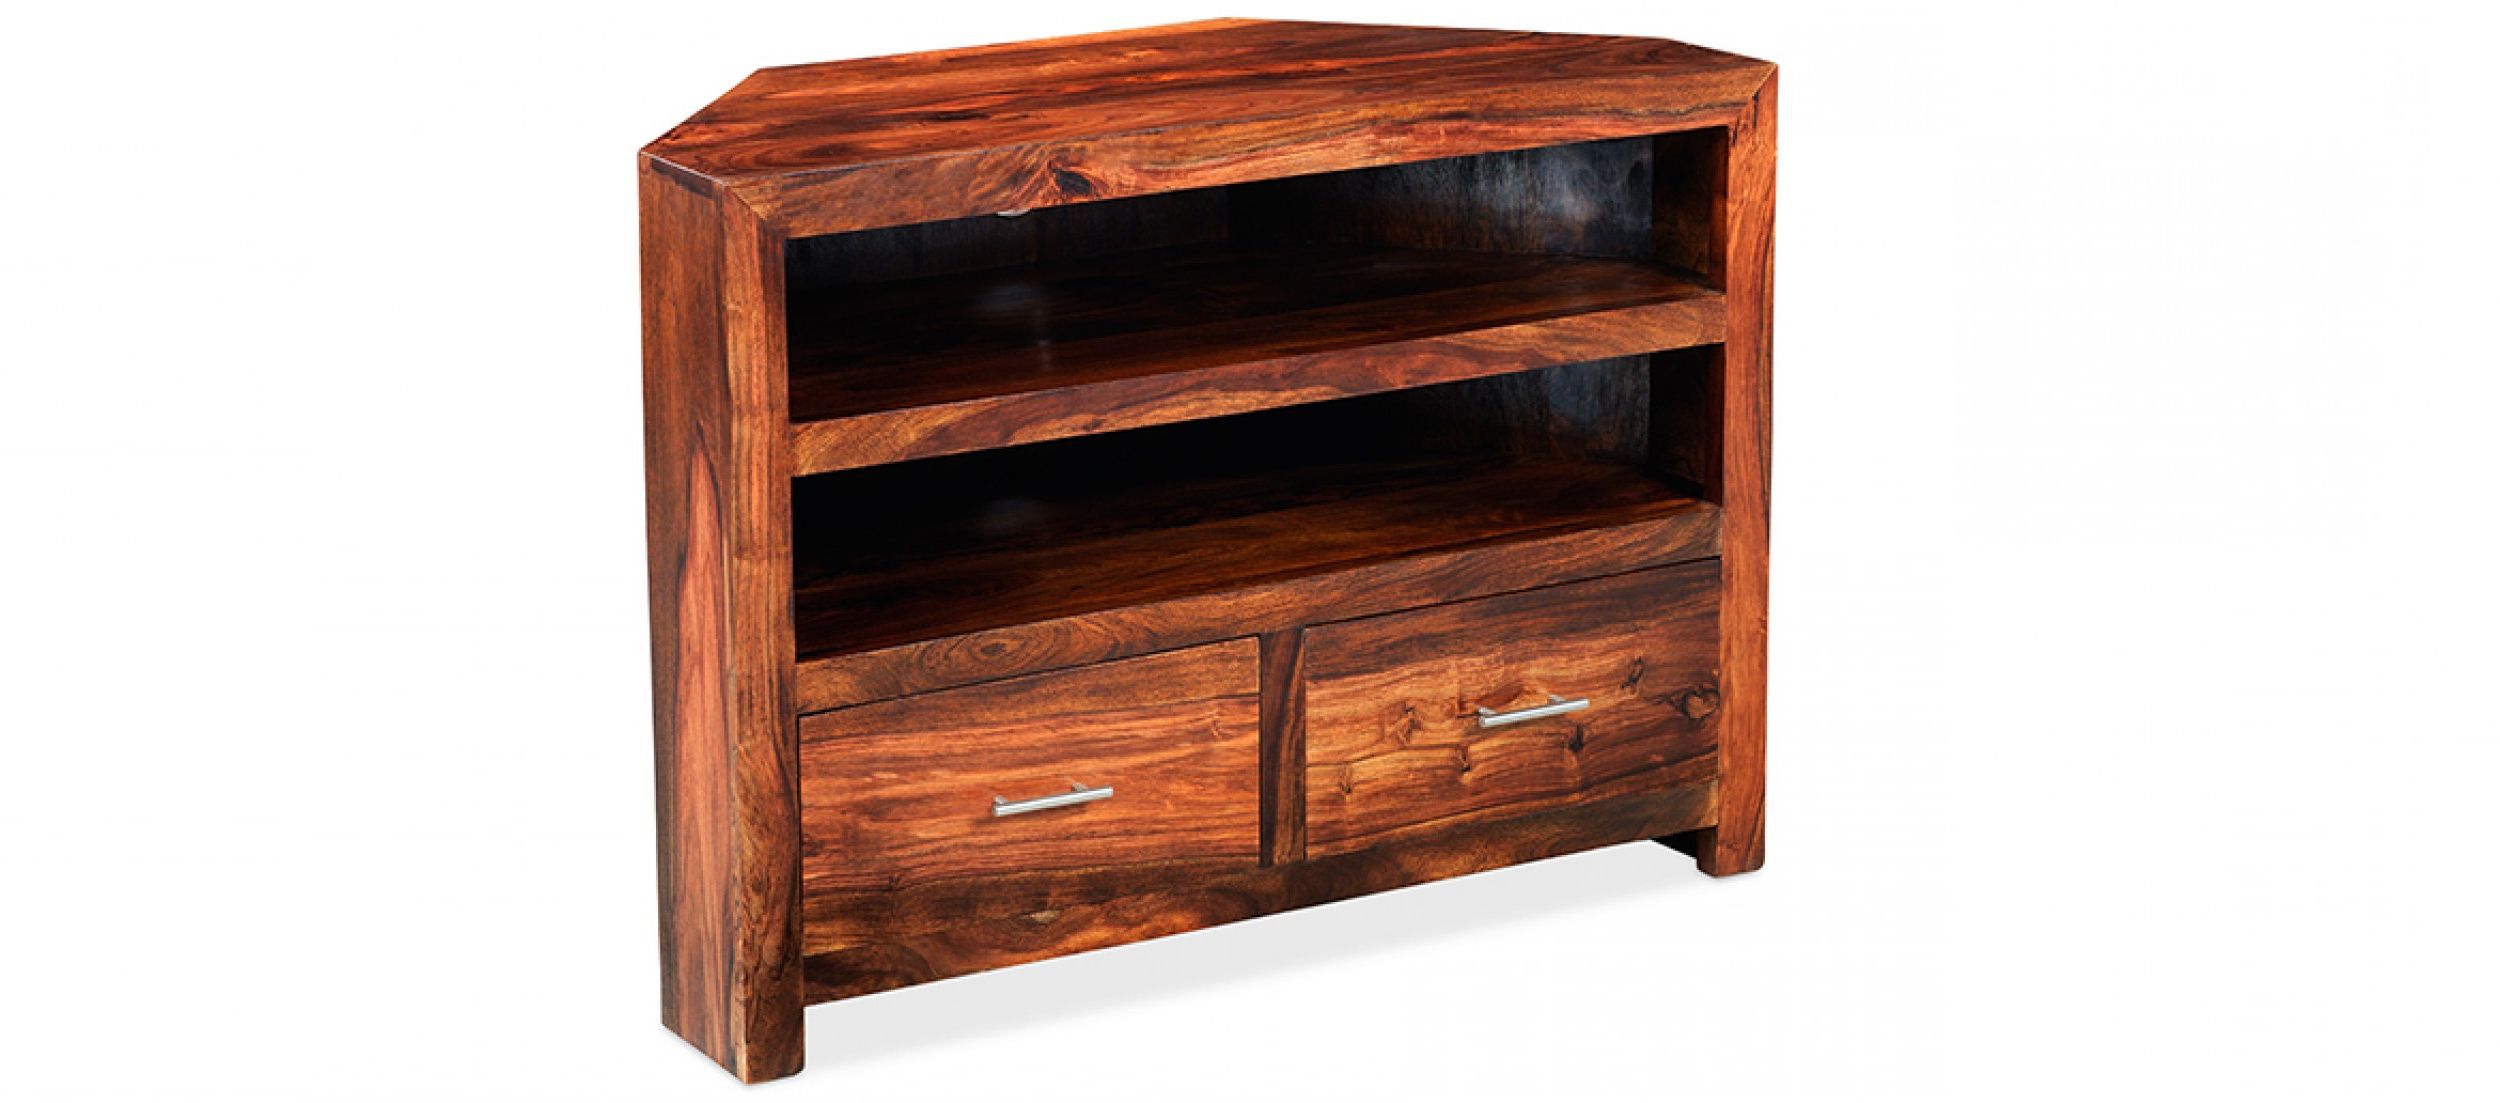 Well Known Wooden Corner Tv Units For Cube Sheesham Corner Tv Cabinet (View 13 of 20)